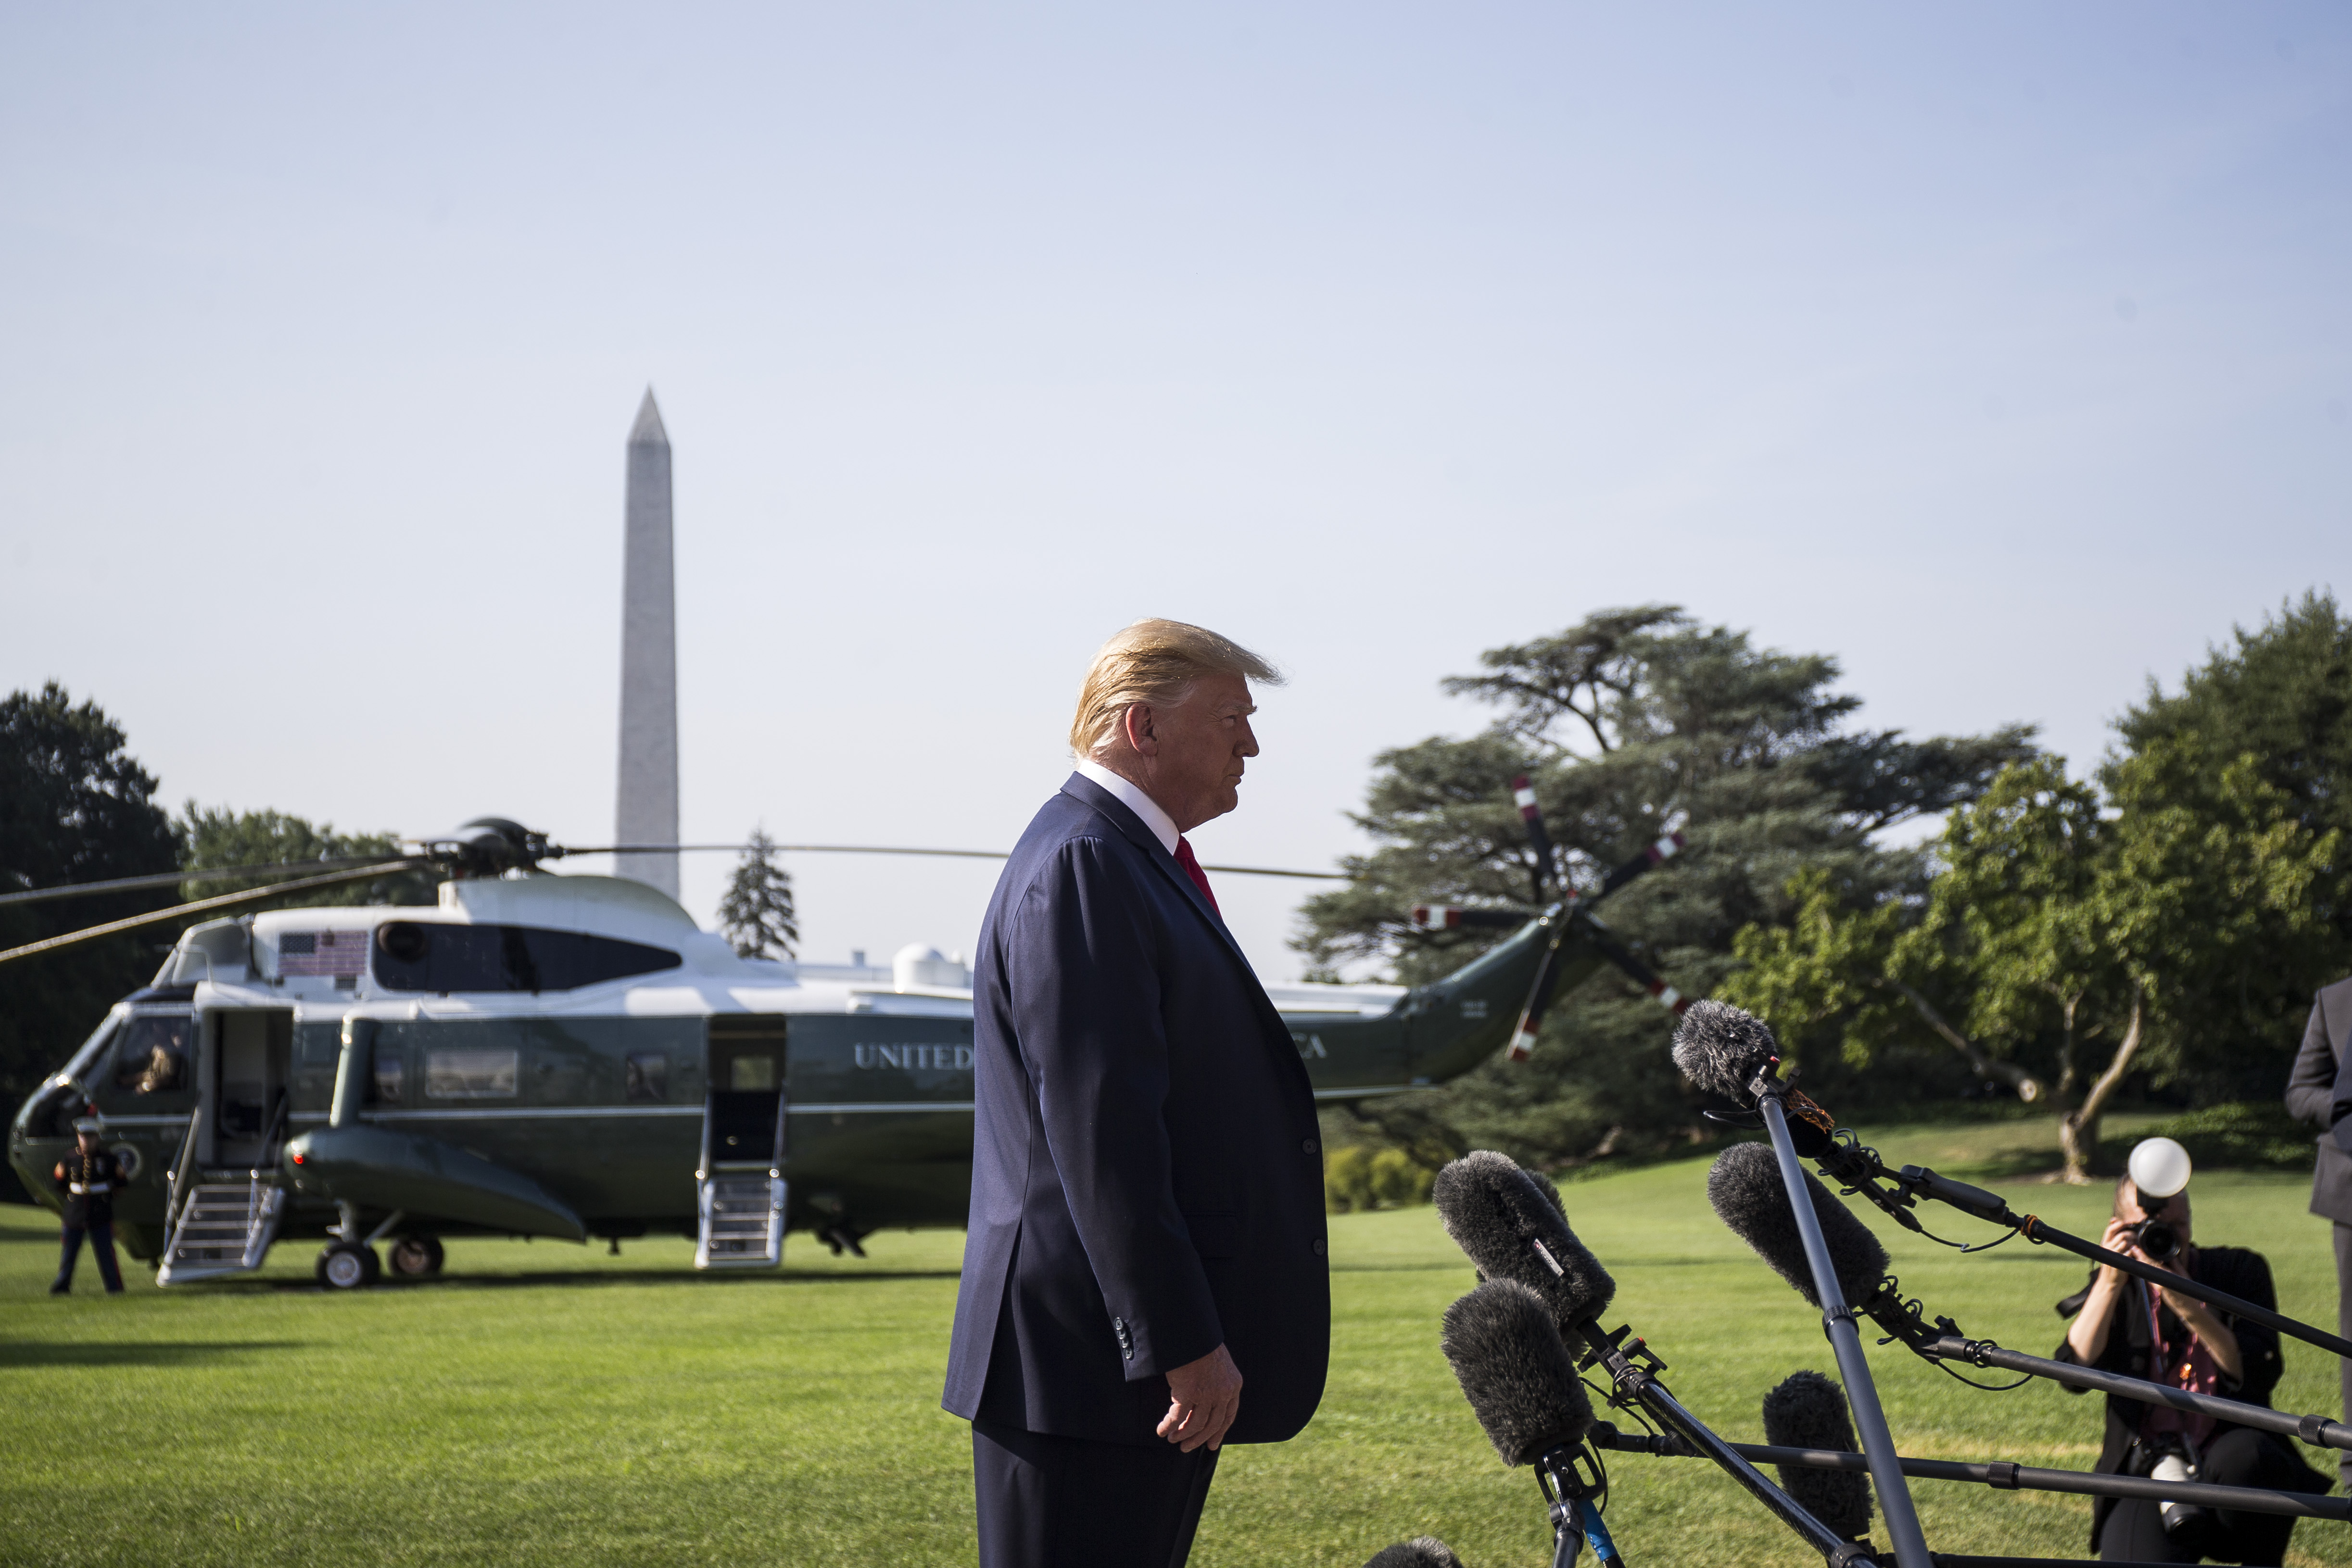 President Donald Trump speaks to members of the press before departing from the White House en route to Dayton, Ohio and El Paso, Texas on August 7, 2019 in Washington, DC. (Zach Gibson/Getty Images)